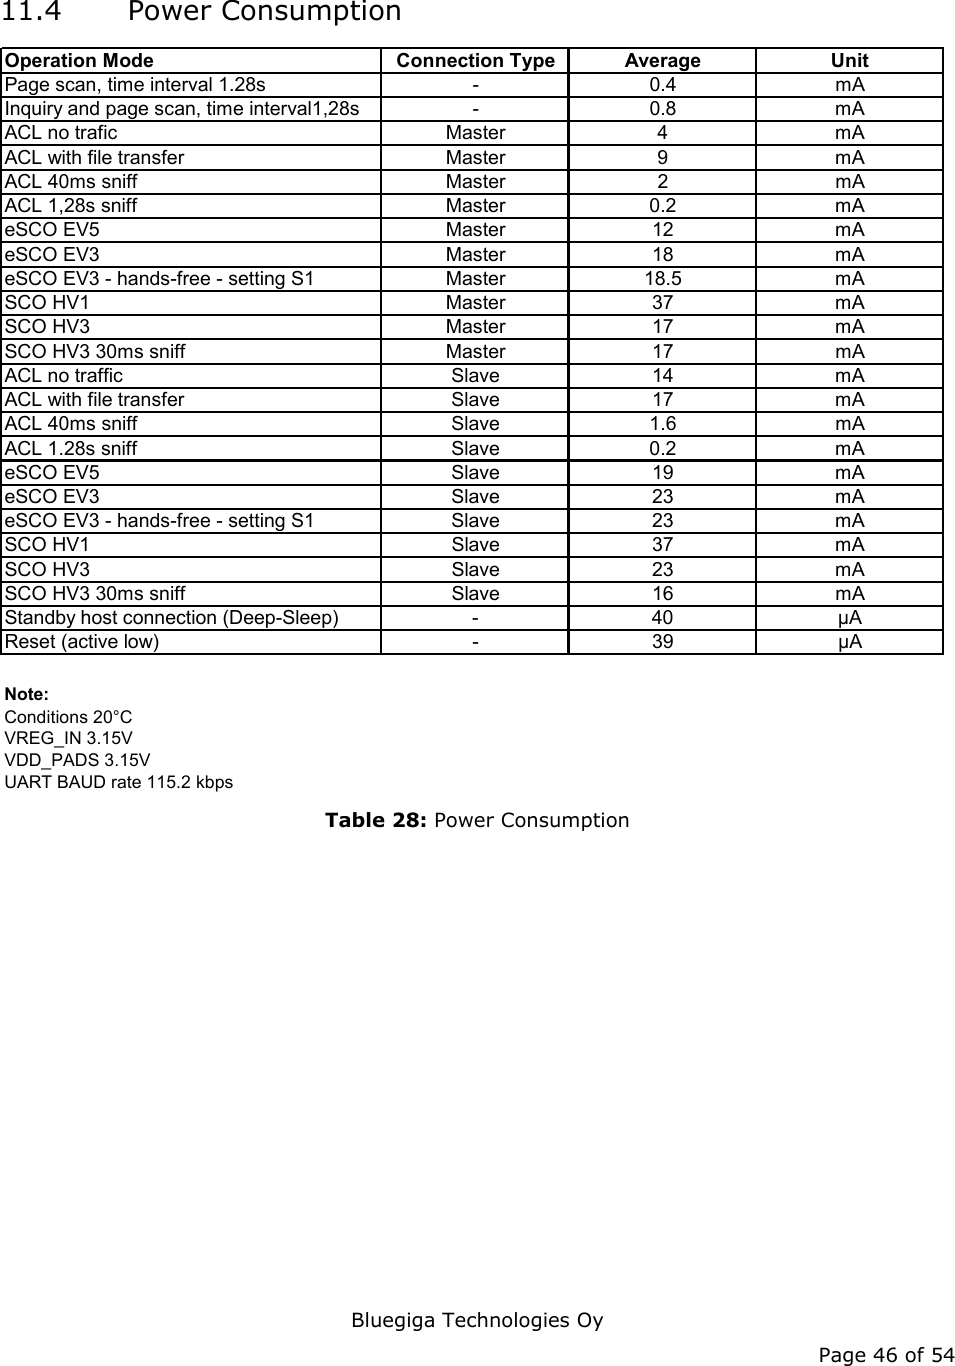   Bluegiga Technologies Oy Page 46 of 54 11.4 Power Consumption Operation Mode Connection TypeAverage UnitPage scan, time interval 1.28s - 0.4 mAInquiry and page scan, time interval1,28s - 0.8 mAACL no trafic Master 4 mAACL with file transfer Master 9 mAACL 40ms sniff Master 2 mAACL 1,28s sniff Master 0.2 mAeSCO EV5 Master 12 mAeSCO EV3 Master 18 mAeSCO EV3 - hands-free - setting S1 Master 18.5 mASCO HV1 Master 37 mASCO HV3 Master 17 mASCO HV3 30ms sniff Master 17 mAACL no traffic Slave 14 mAACL with file transfer Slave 17 mAACL 40ms sniff Slave 1.6 mAACL 1.28s sniff Slave 0.2 mAeSCO EV5 Slave 19 mAeSCO EV3 Slave 23 mAeSCO EV3 - hands-free - setting S1 Slave 23 mASCO HV1 Slave 37 mASCO HV3 Slave 23 mASCO HV3 30ms sniff Slave 16 mAStandby host connection (Deep-Sleep) - 40 µAReset (active low) - 39 µANote: Conditions 20°C VREG_IN 3.15VVDD_PADS 3.15VUART BAUD rate 115.2 kbps  Table 28: Power Consumption   